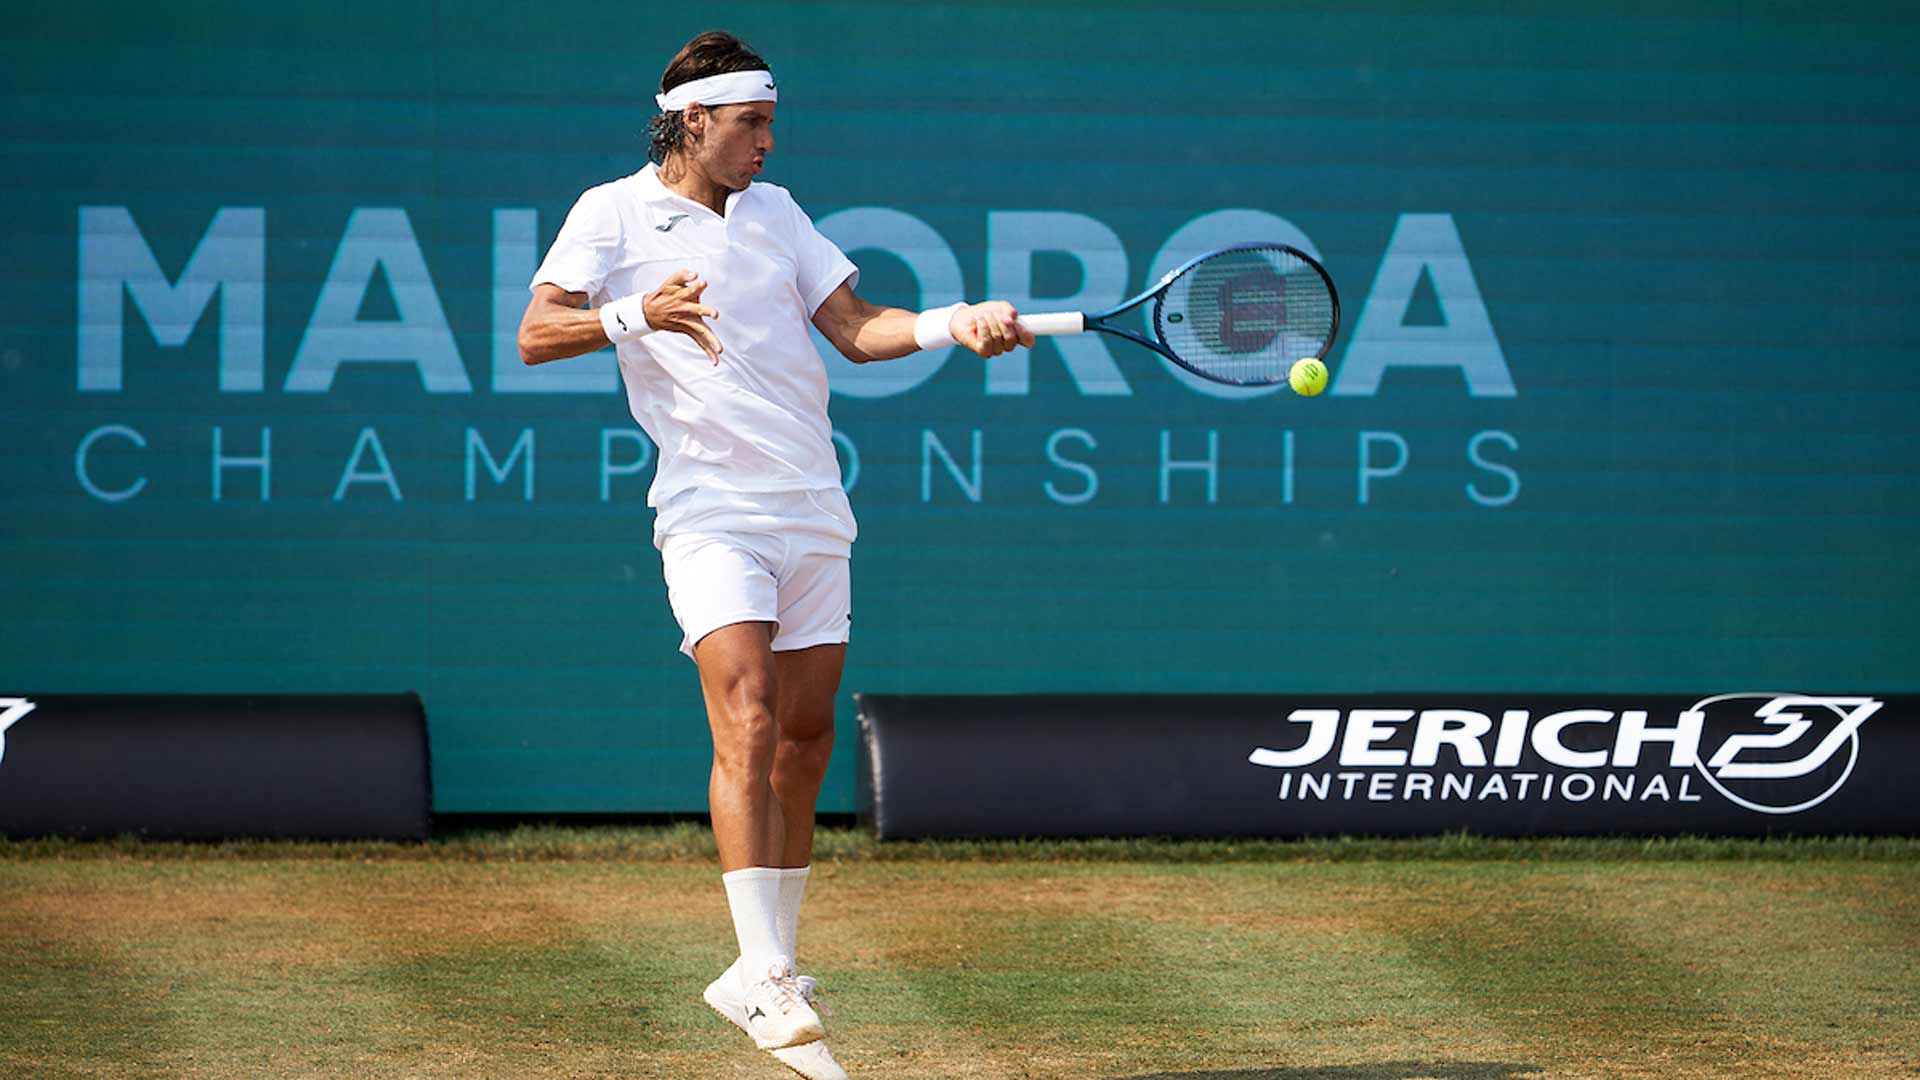 Feliciano Lopez in action at the Mallorca Championships.